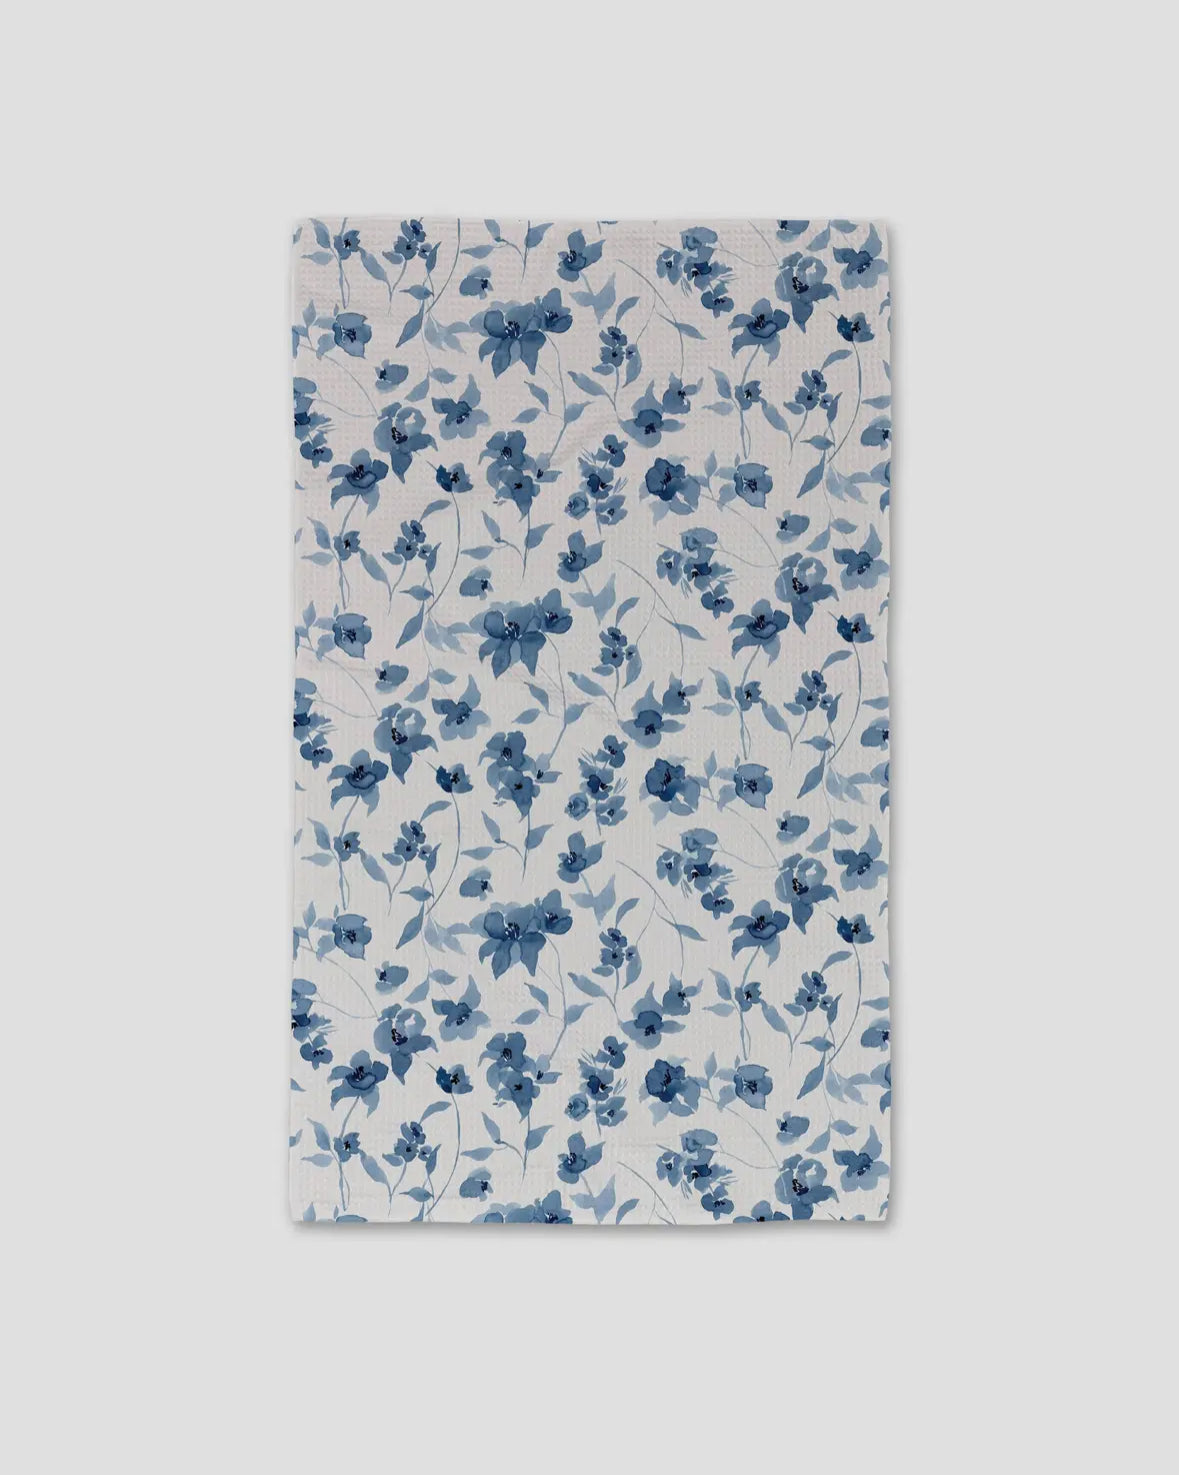 Blue Floral Luxe Hand towel